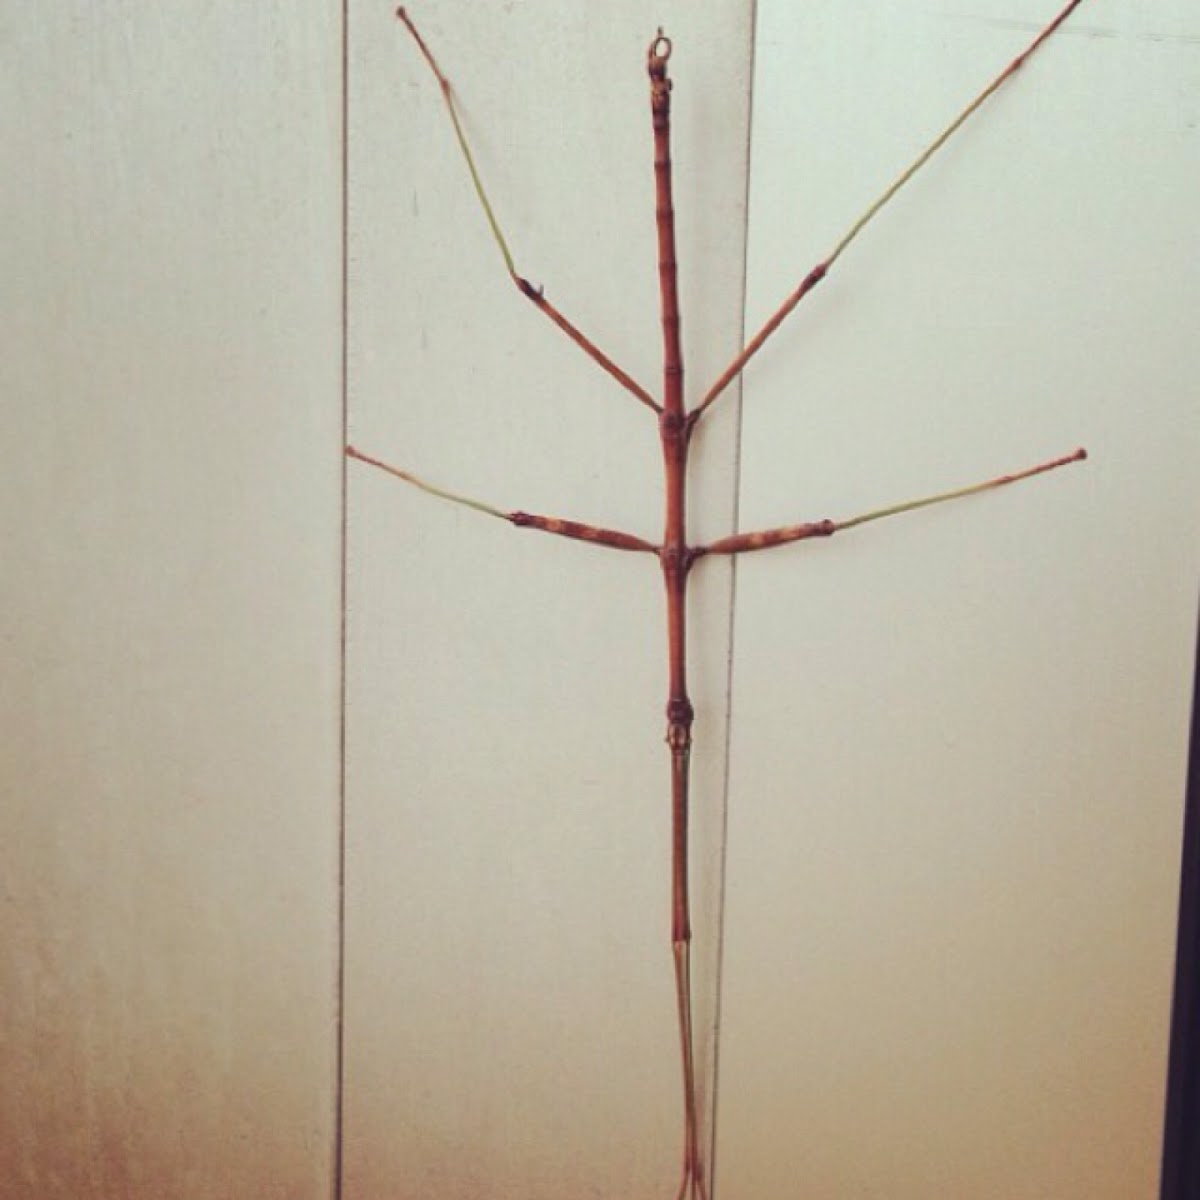 Stick insect or stick bug